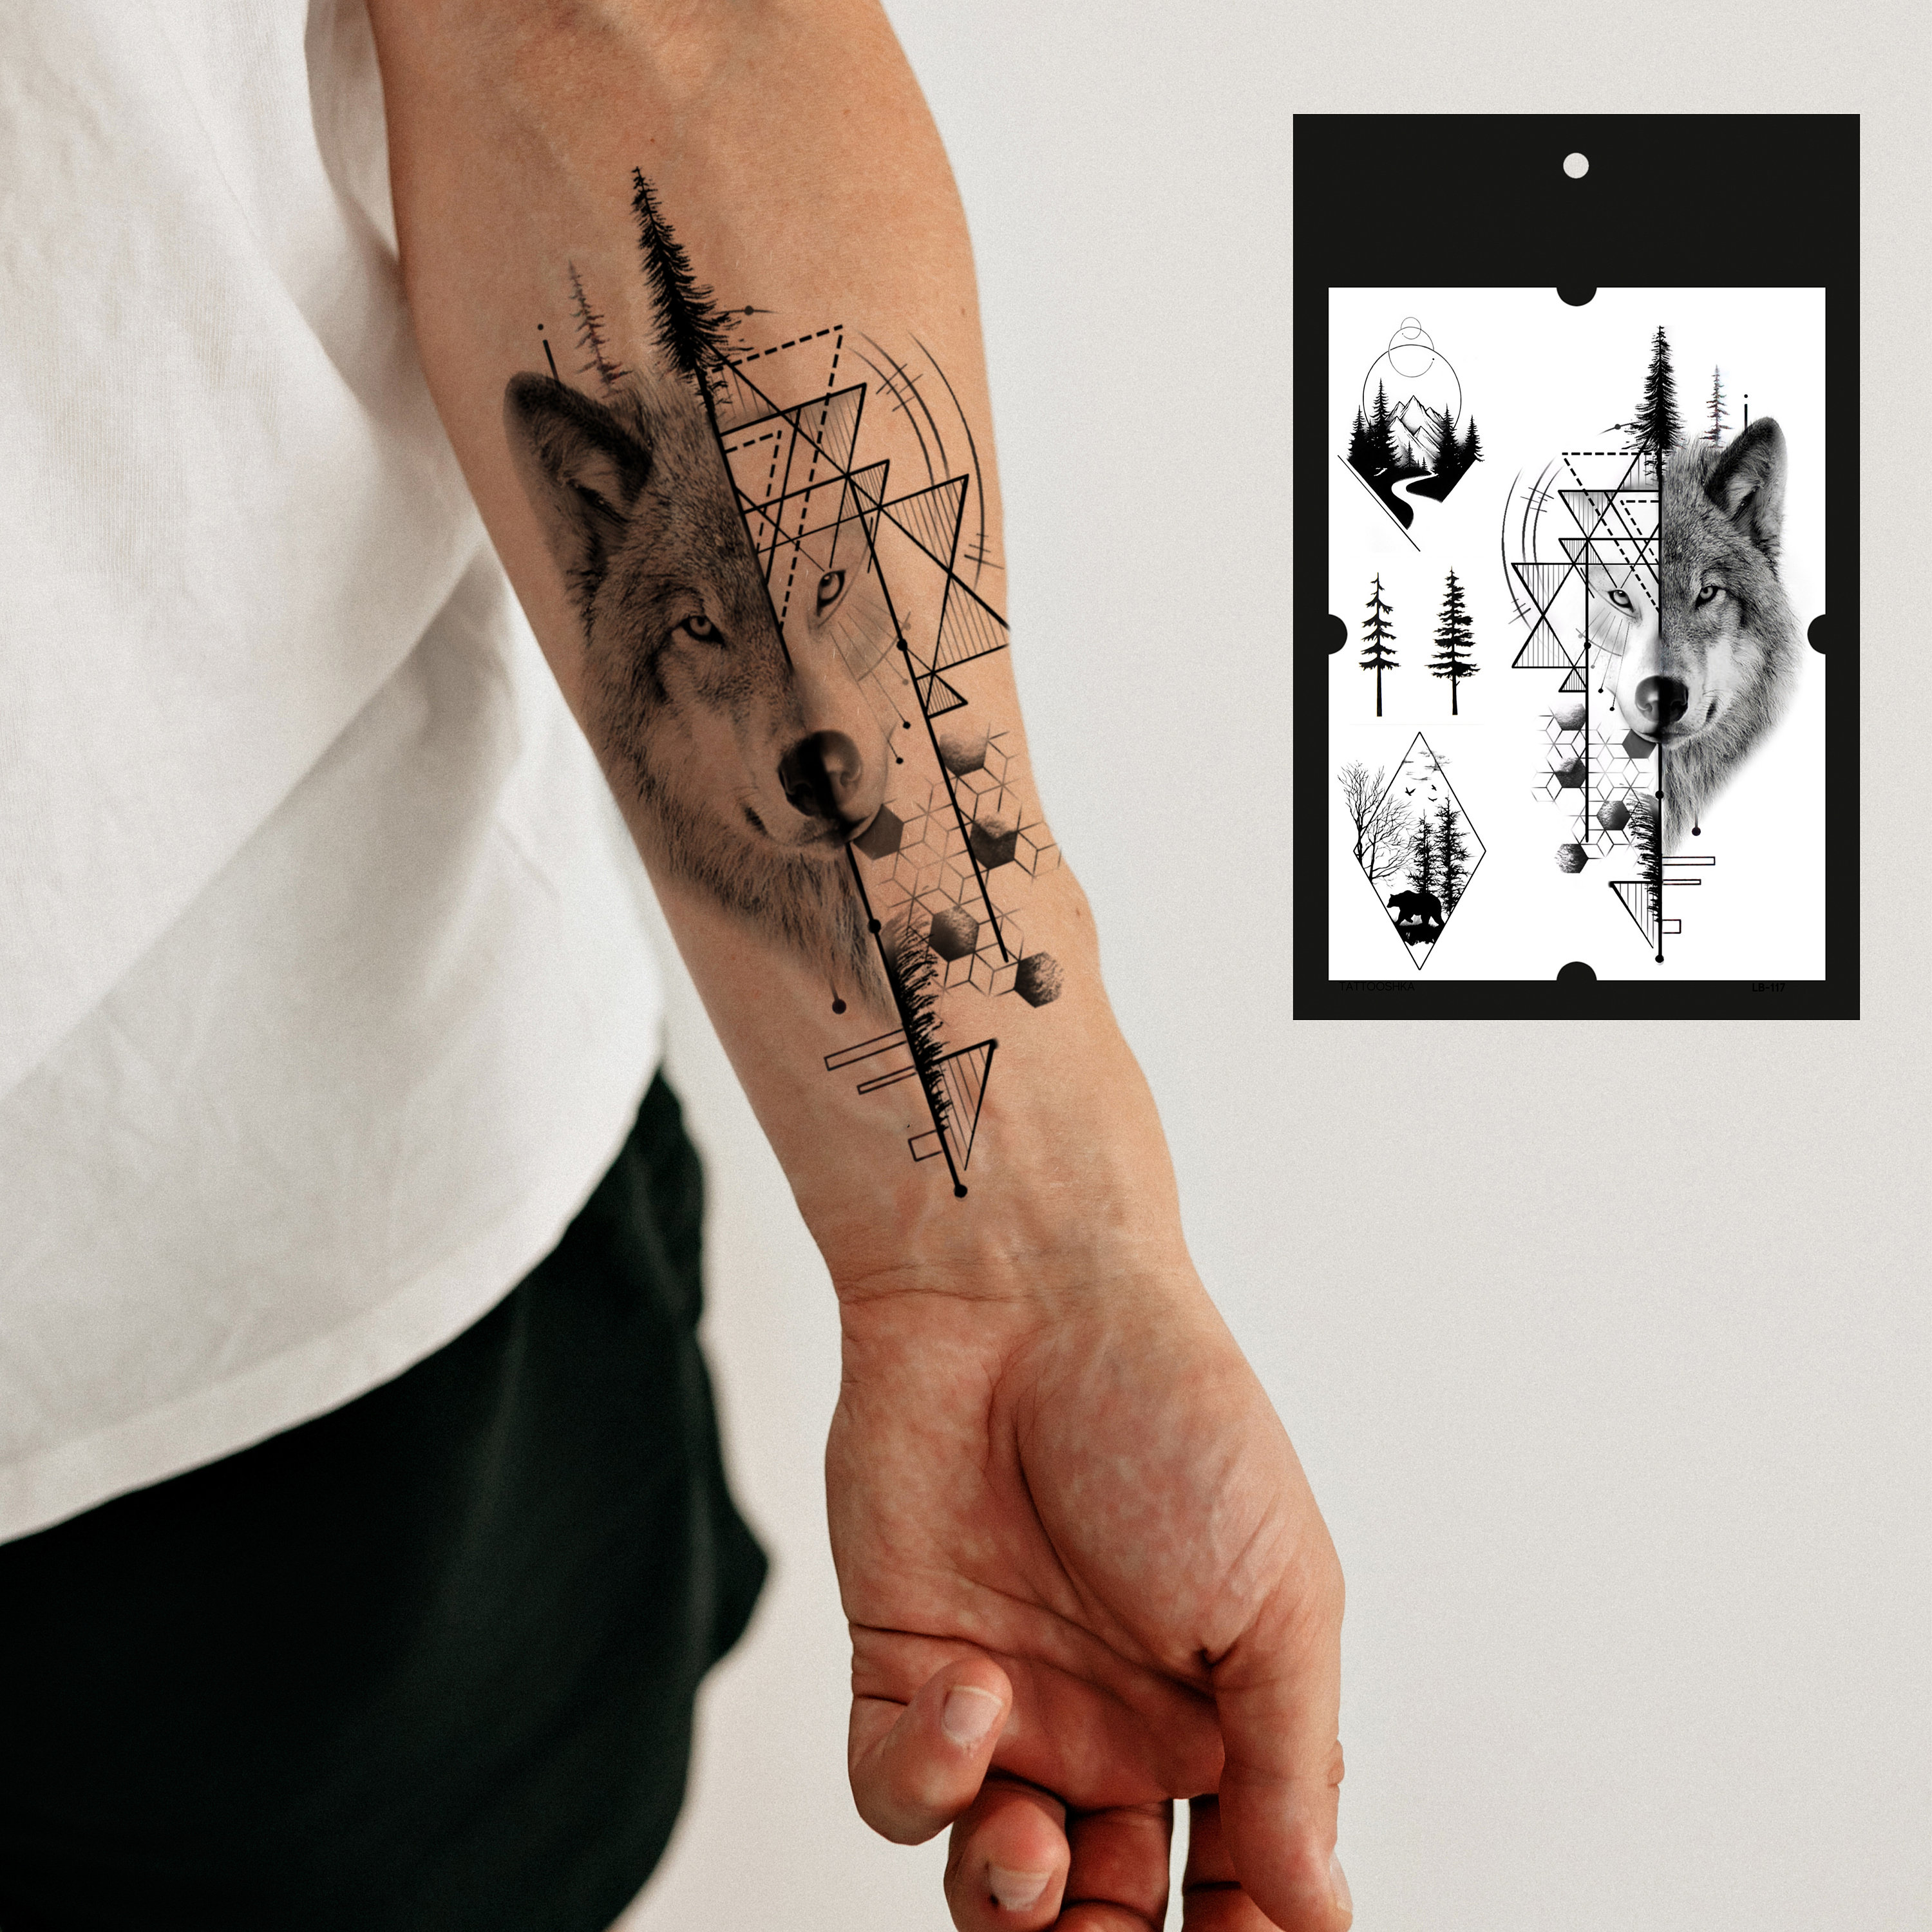 22 Fine Art Tattoo Designs Inspired by Famous Artists  Inside Out